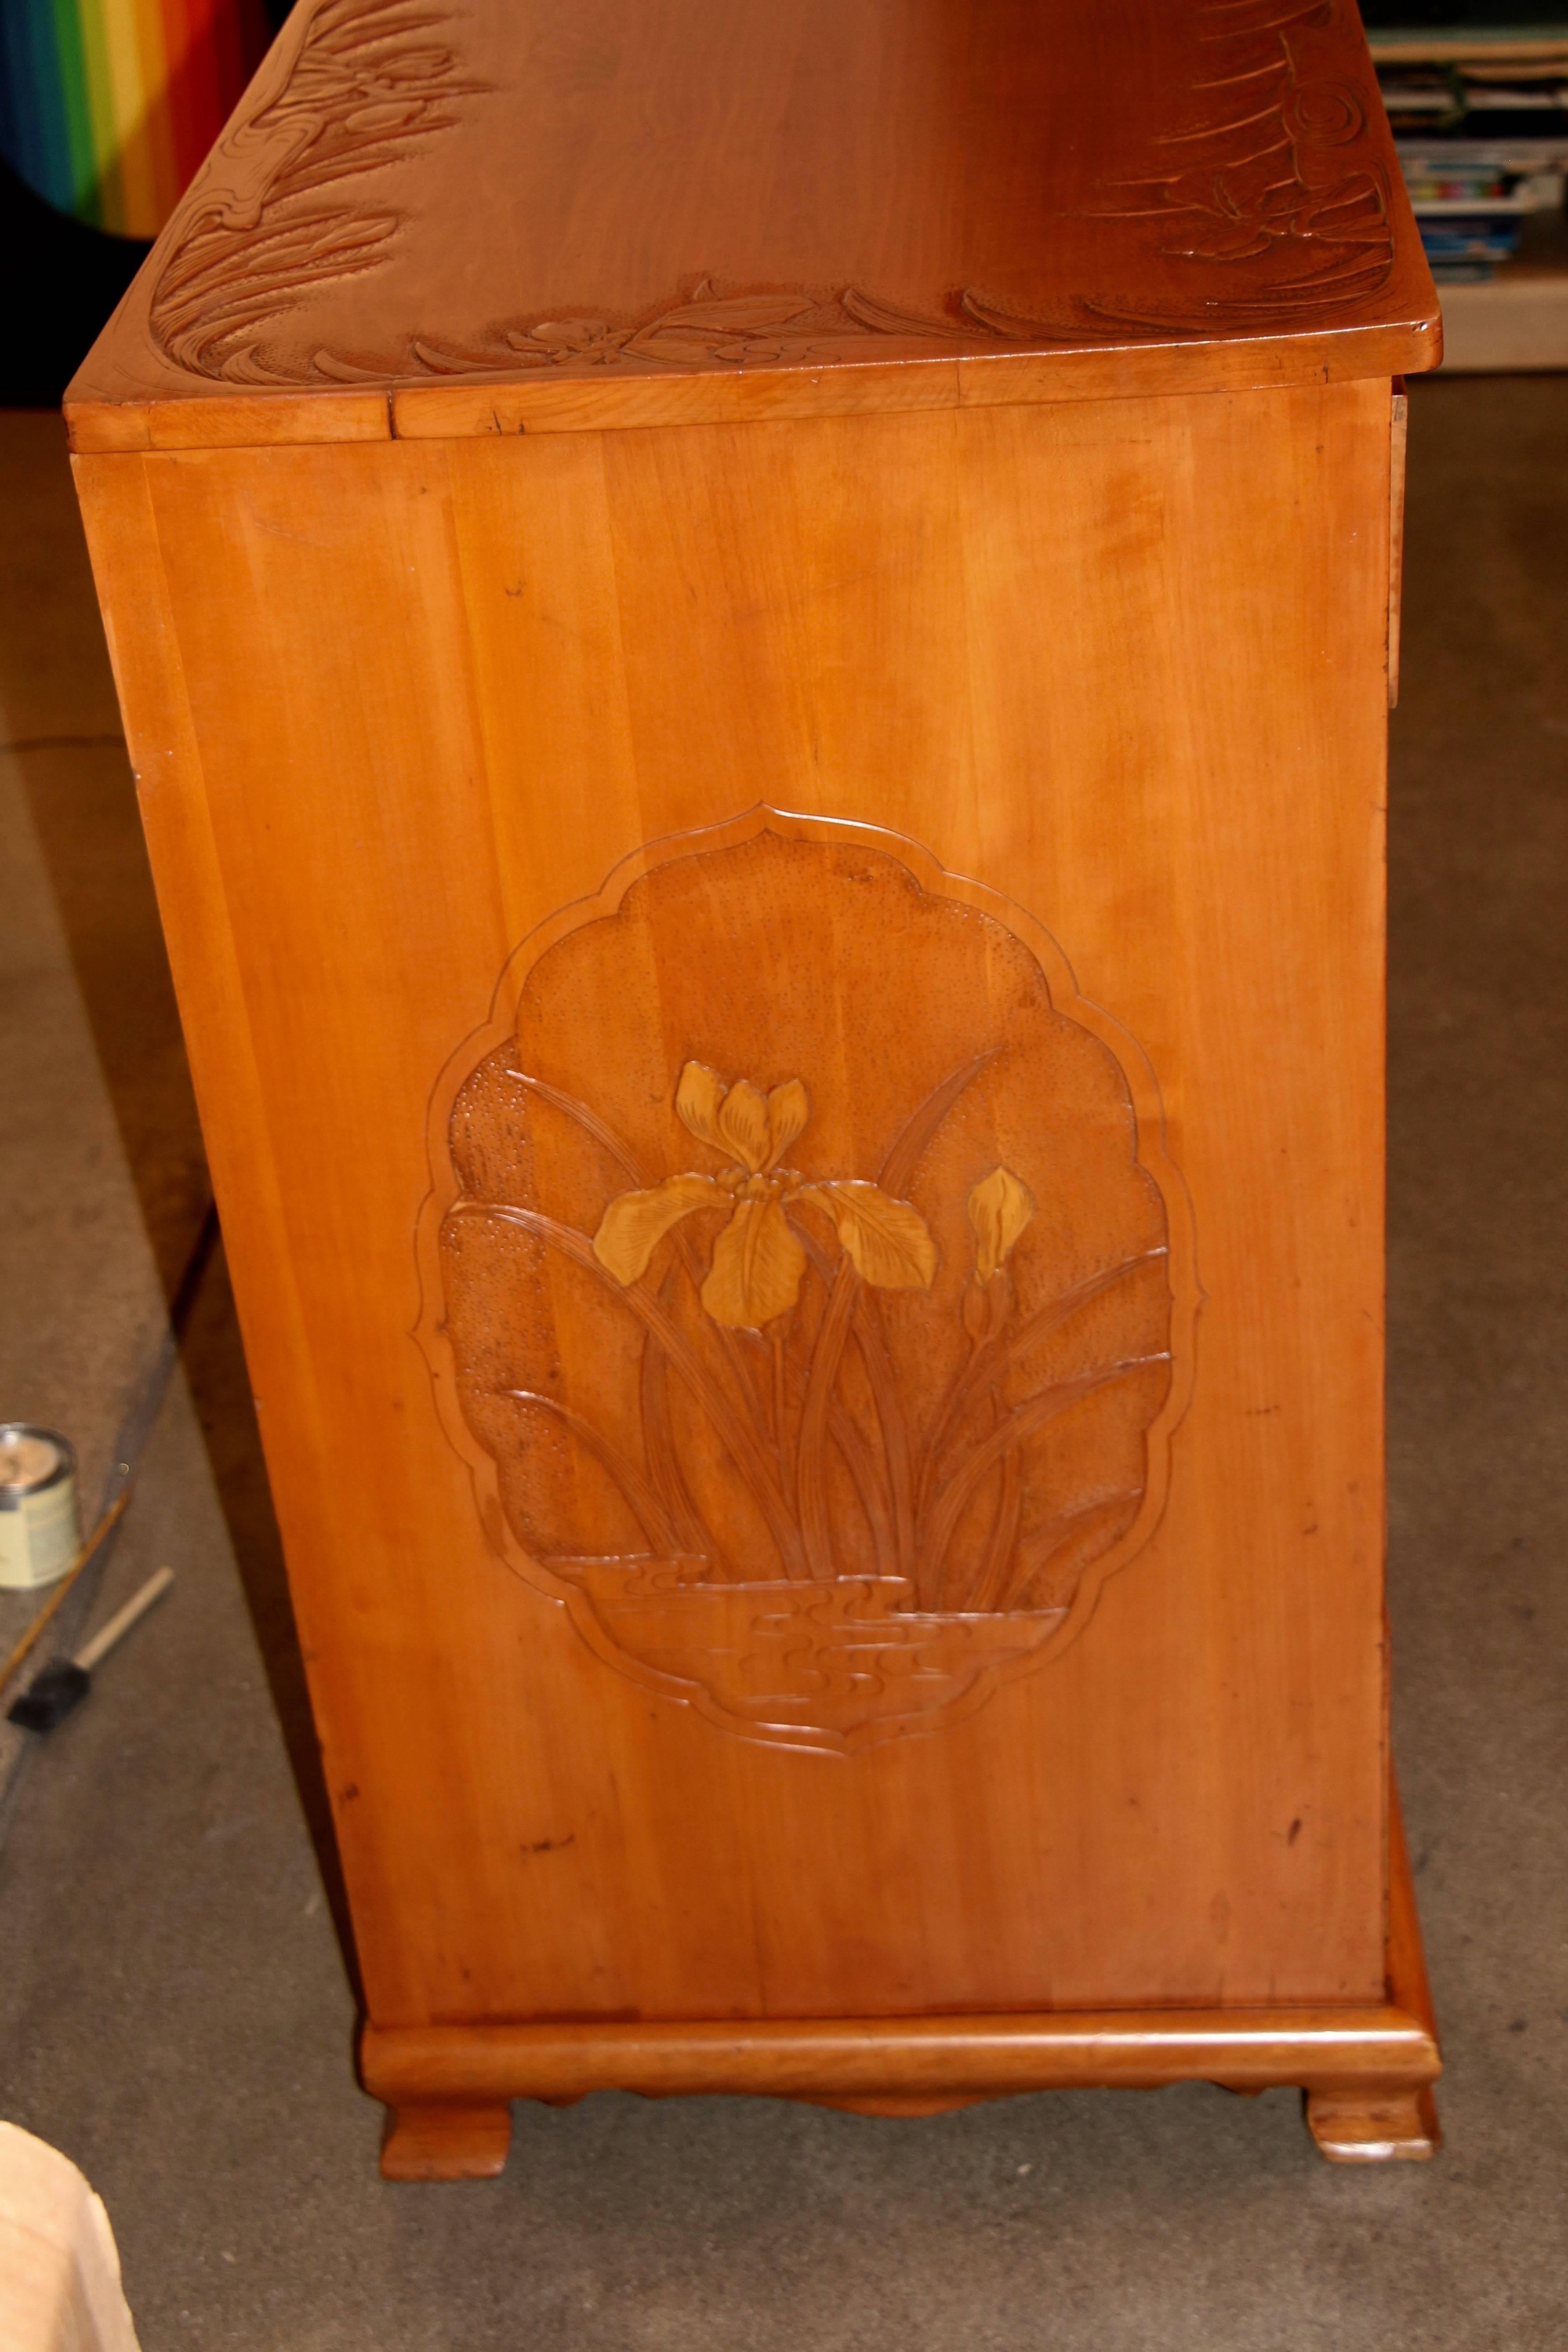 This and the matching nightstands were purchased from the estate of a couple who had a business in Japan before WW2. They had these pieces custom-made for them. While we tried to clean up this piece the drawers are still a little tough to move. A